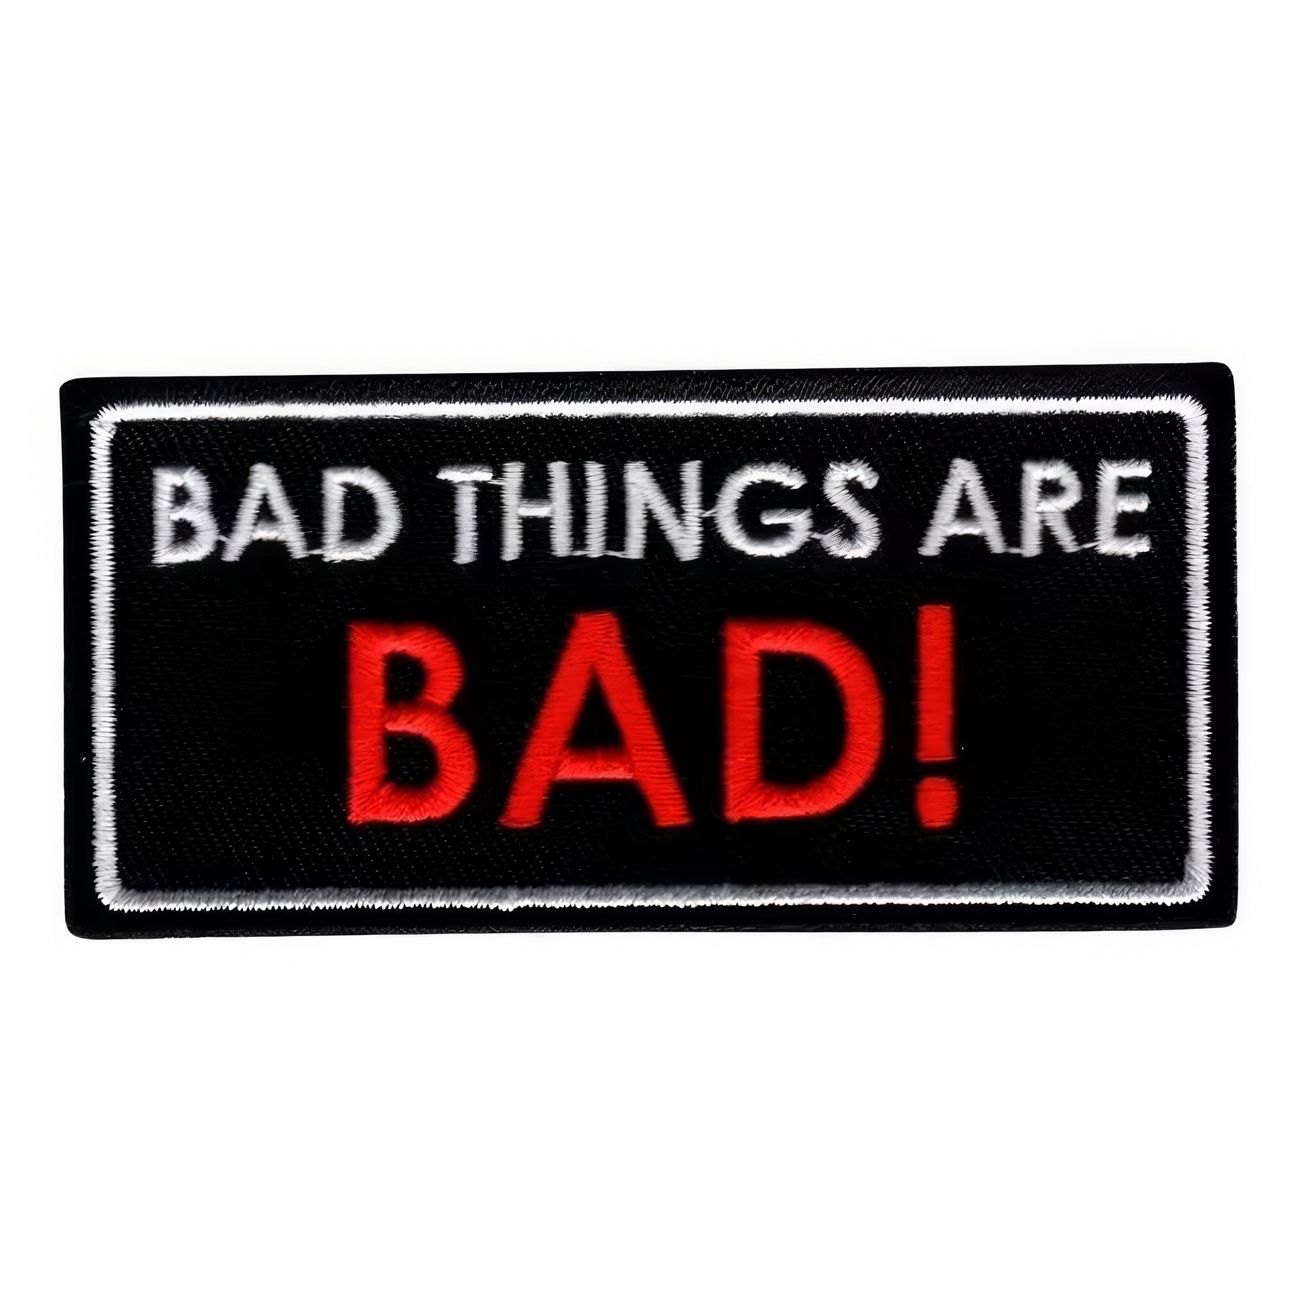 tygmarke-bad-things-are-bad-a-94053-1